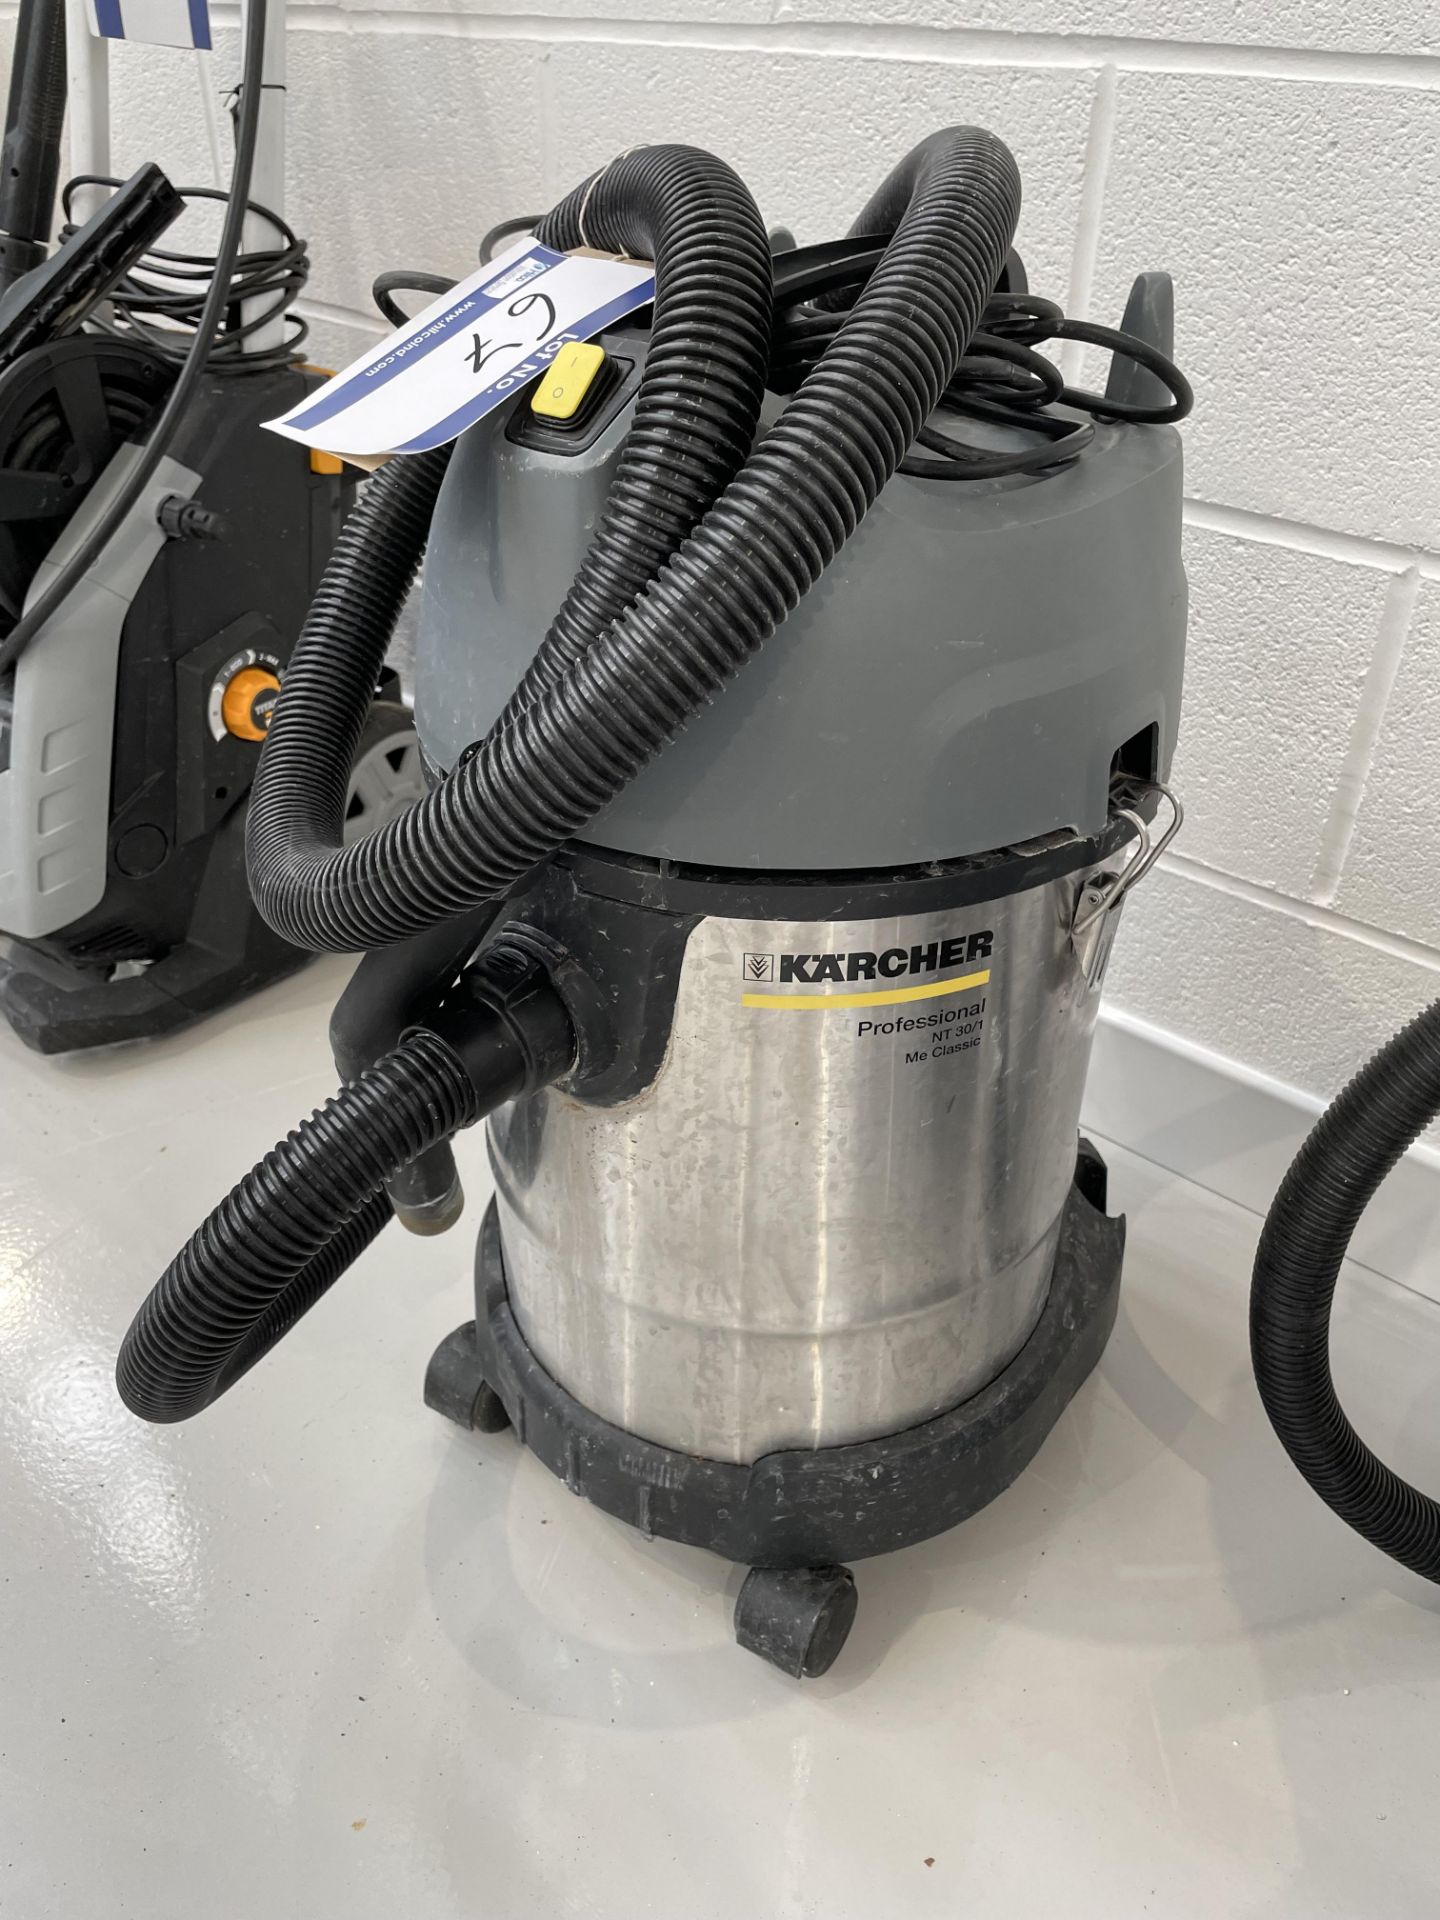 Karcher Professional NT 30/1 Vacuum Cleaner - Image 2 of 2